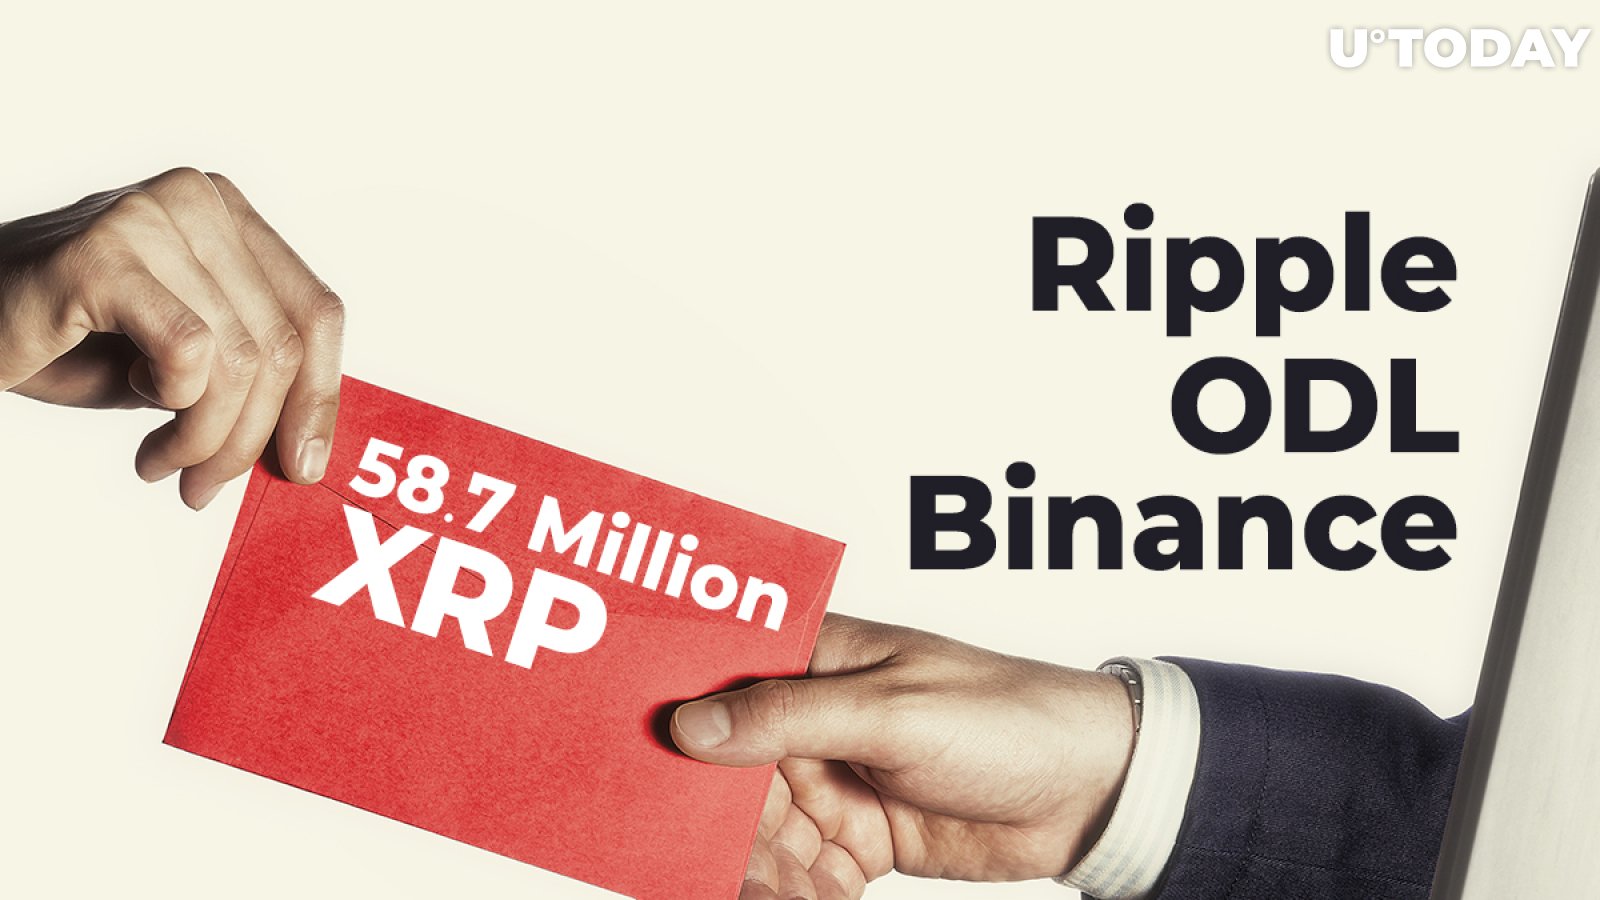 58.7 Million XRP Moved by Ripple, Its ODL Partner and Biggest Exchange Binance